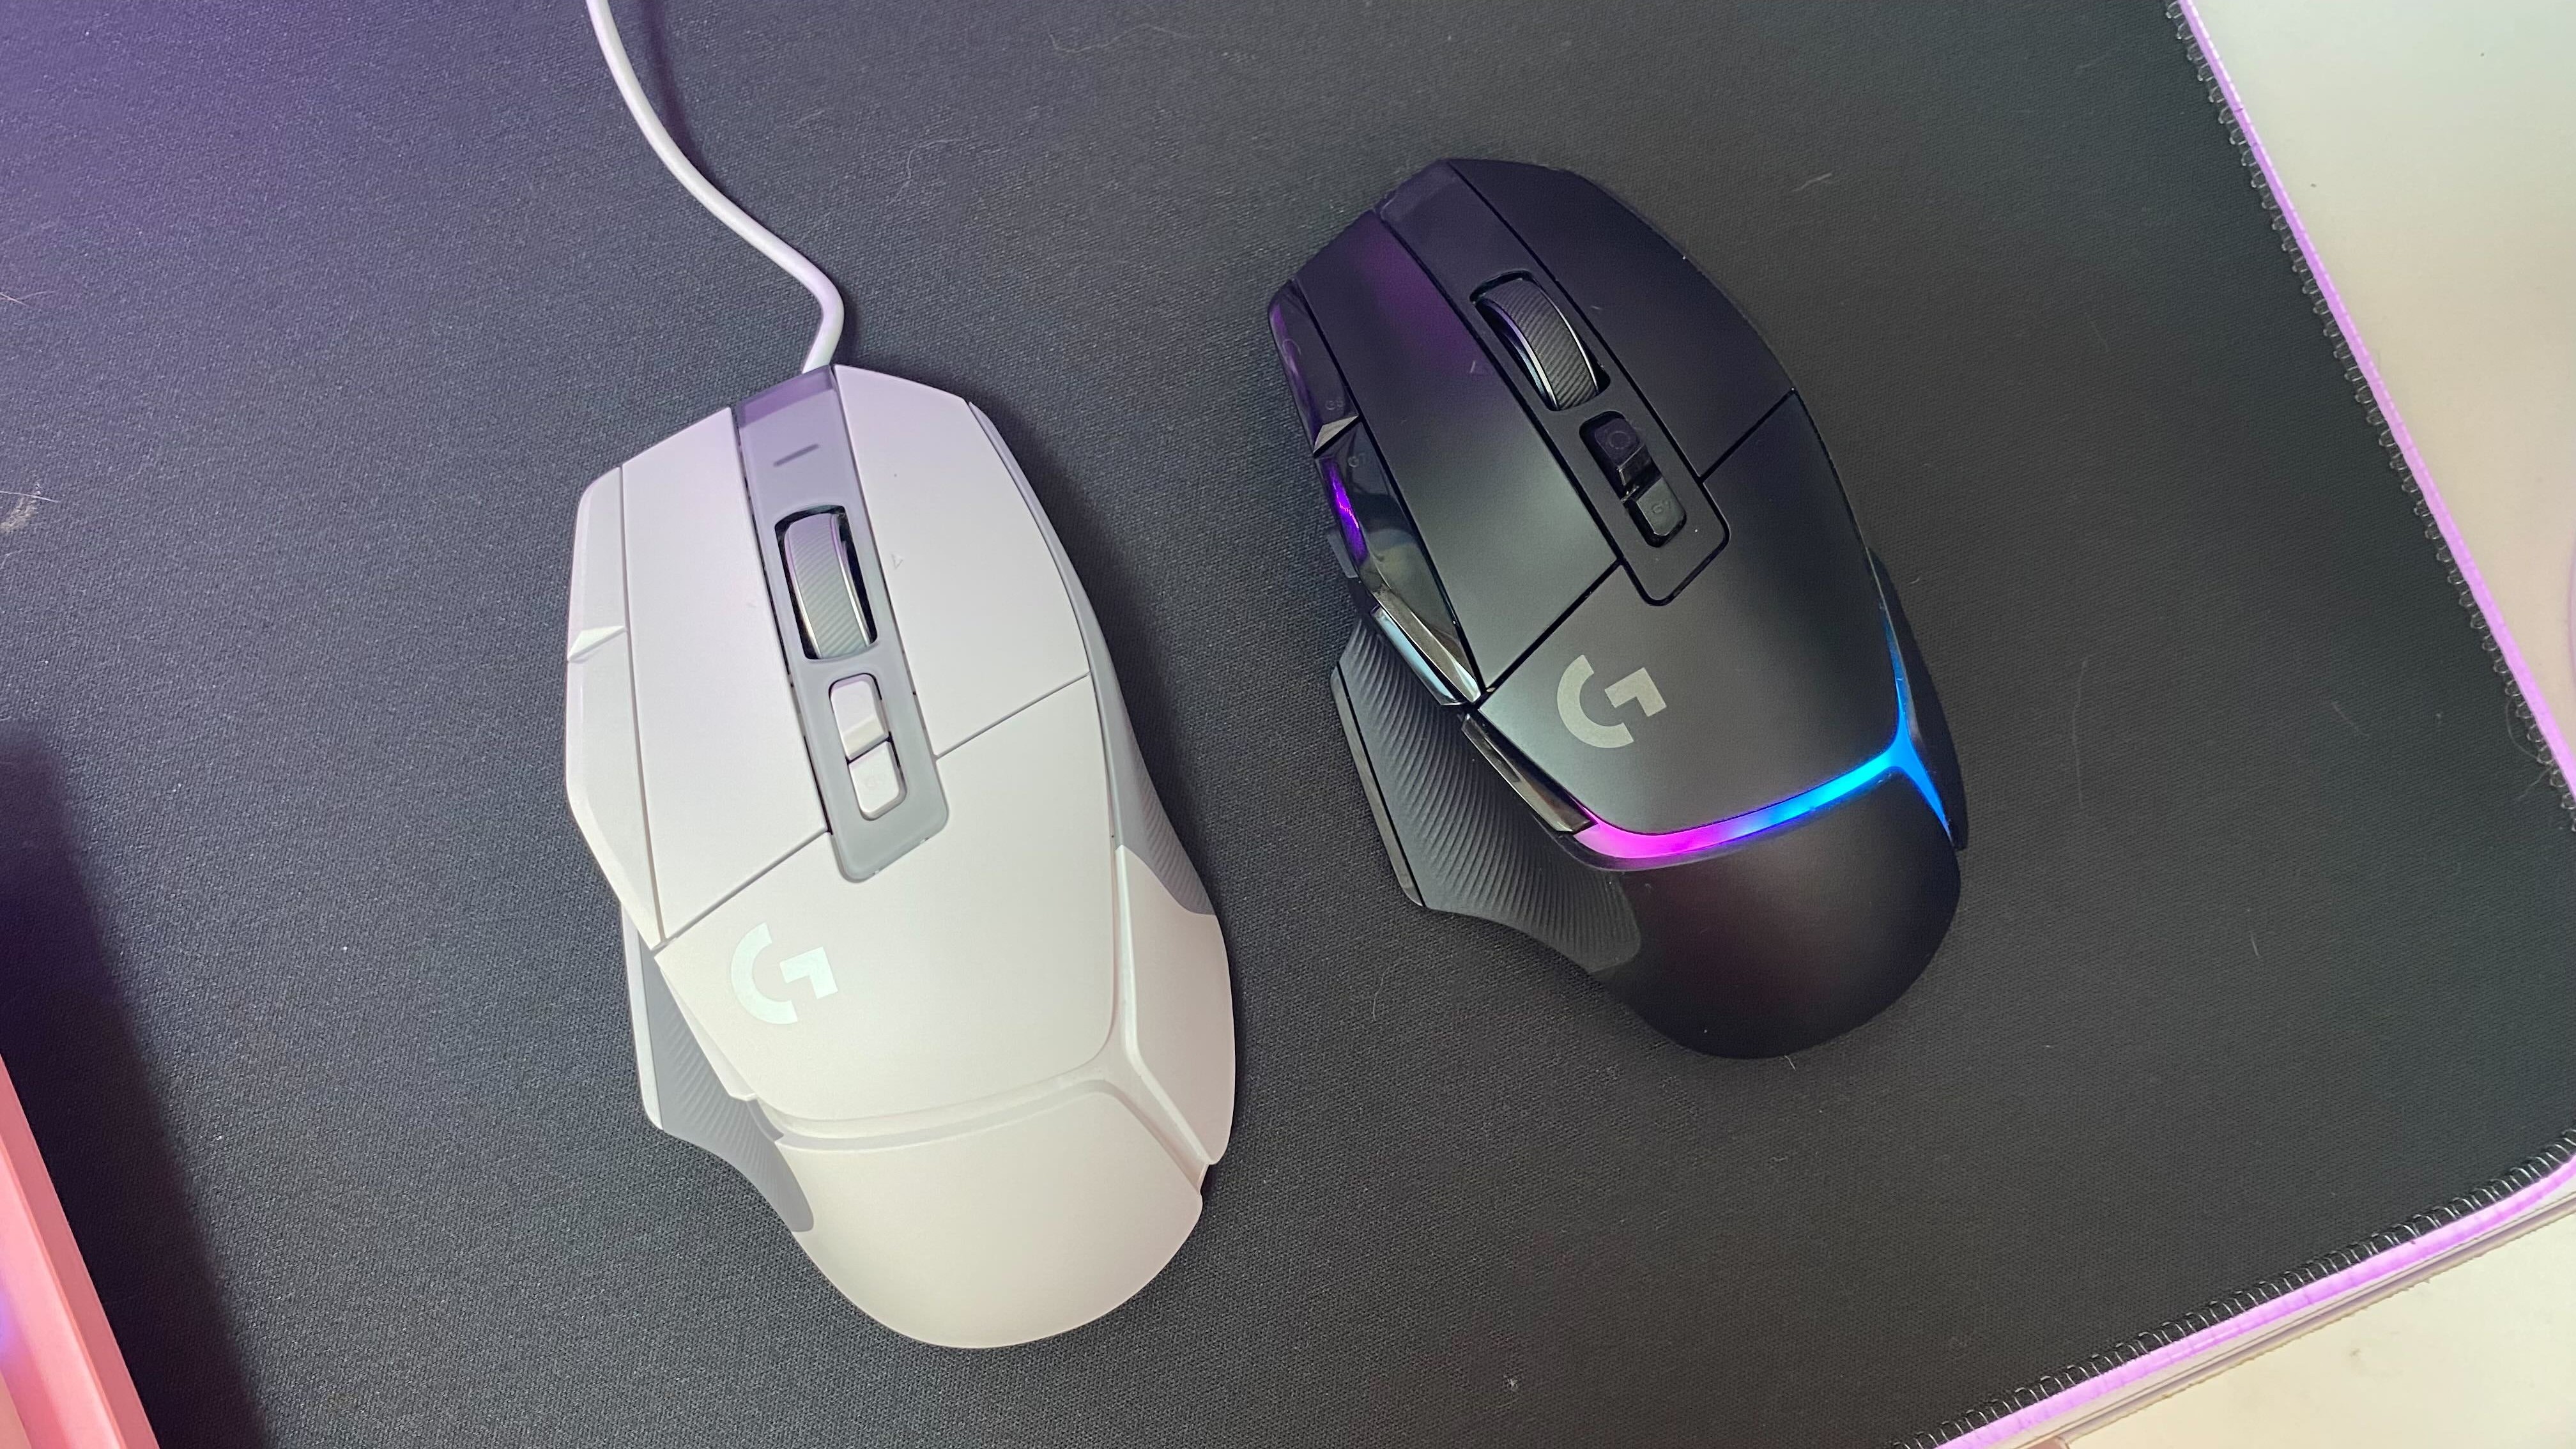 mixer Fradrage kompression Logitech G502 X Plus gaming mouse review: "Potential contenders for the top  spot" | GamesRadar+